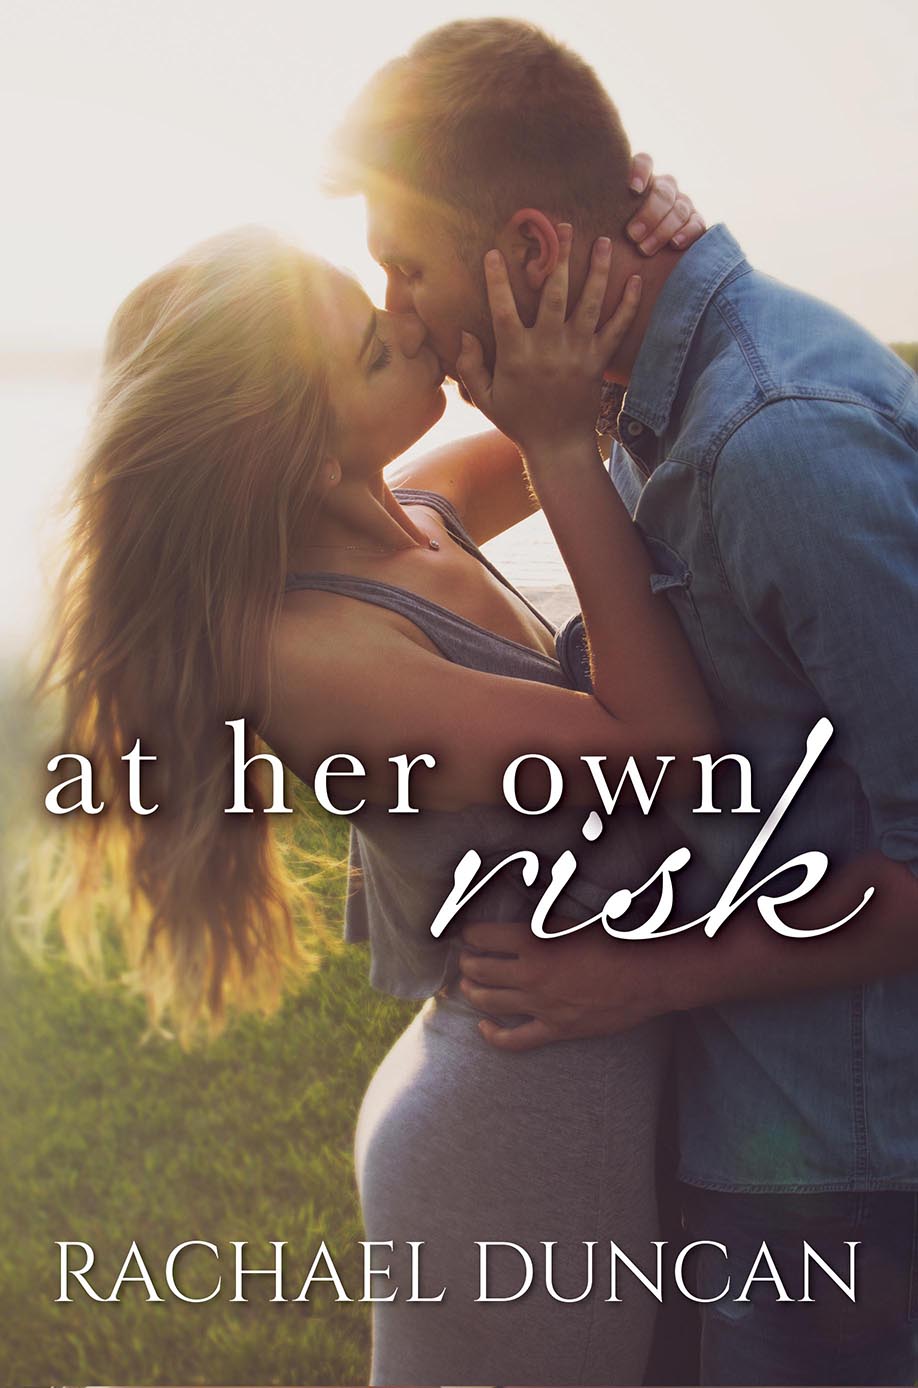 Category At-her-own-risk-by-rachael-duncan-release-blitz-review photo image